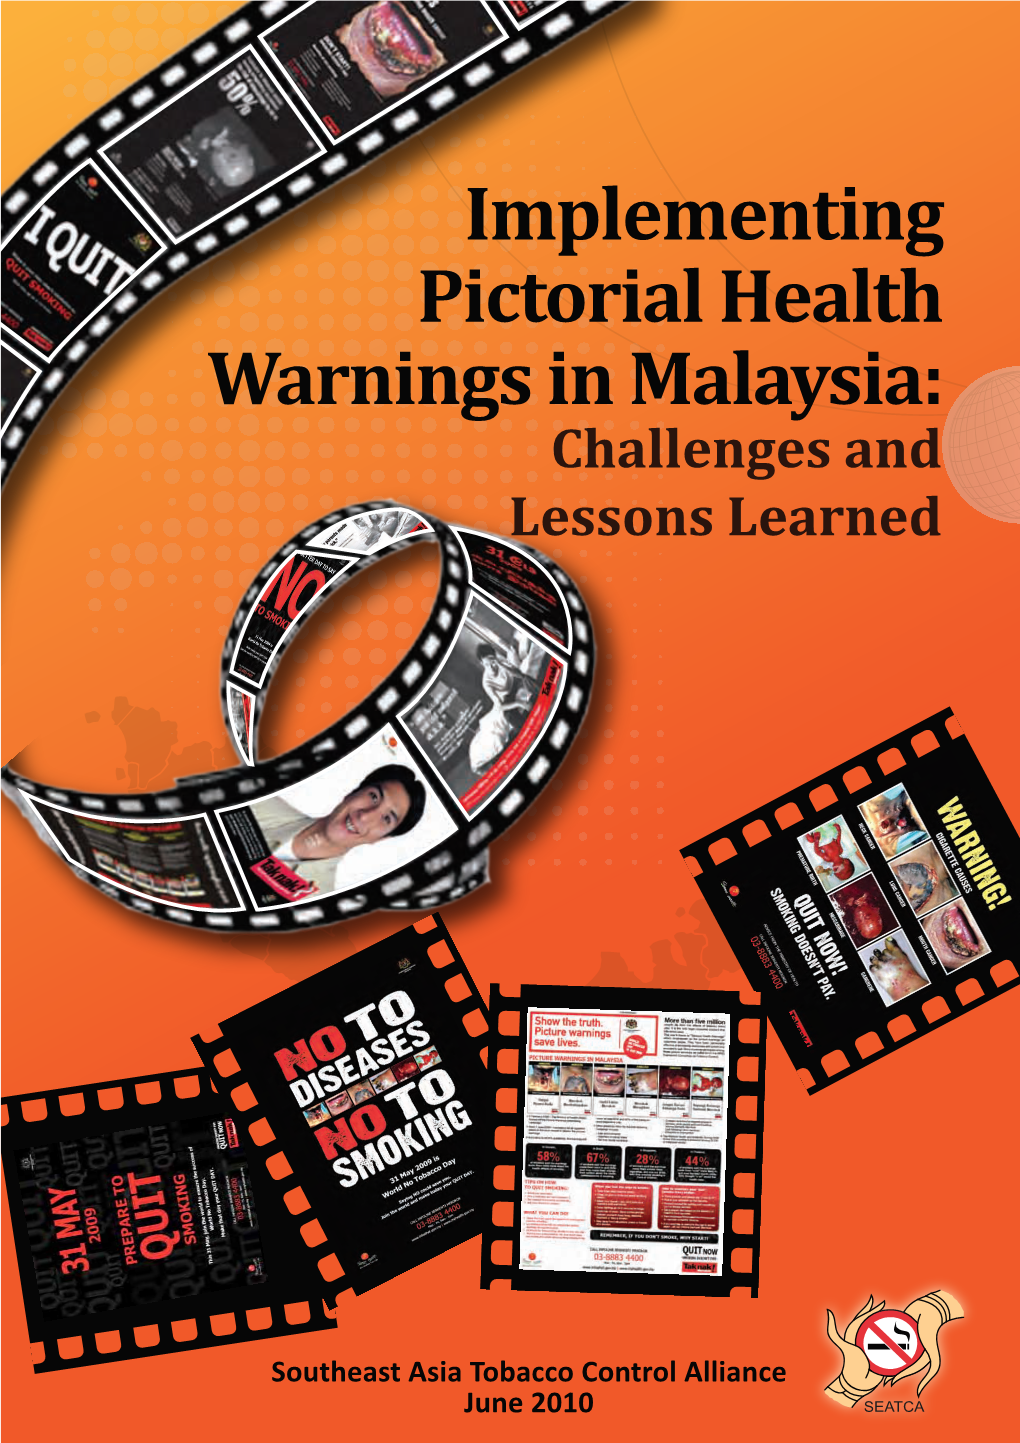 Implementing Pictorial Health Warnings in Malaysia: Challenges and Lessons Learned